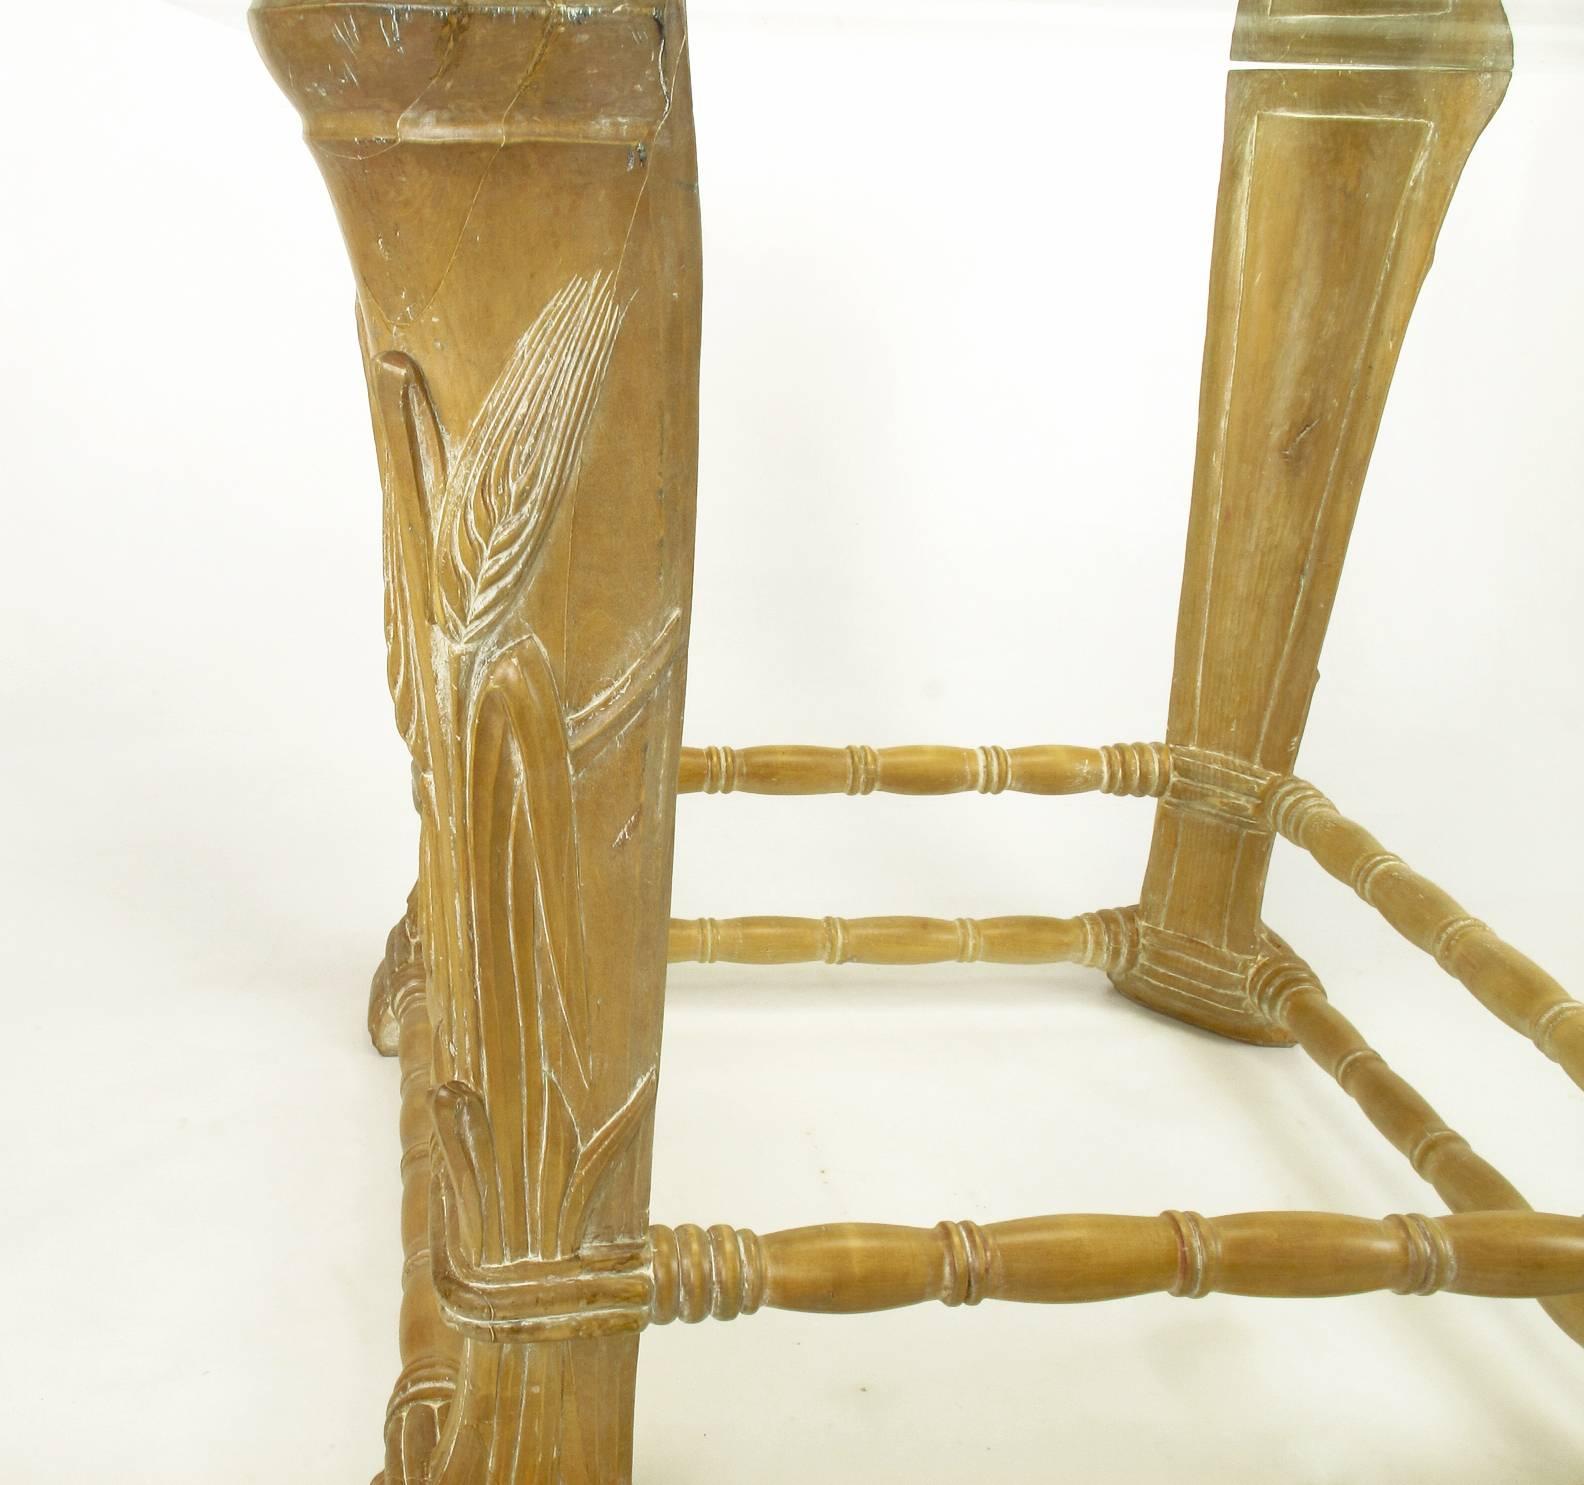 20th Century Limed Alder Center Table with Carved Wheat Relief and Glass Top For Sale